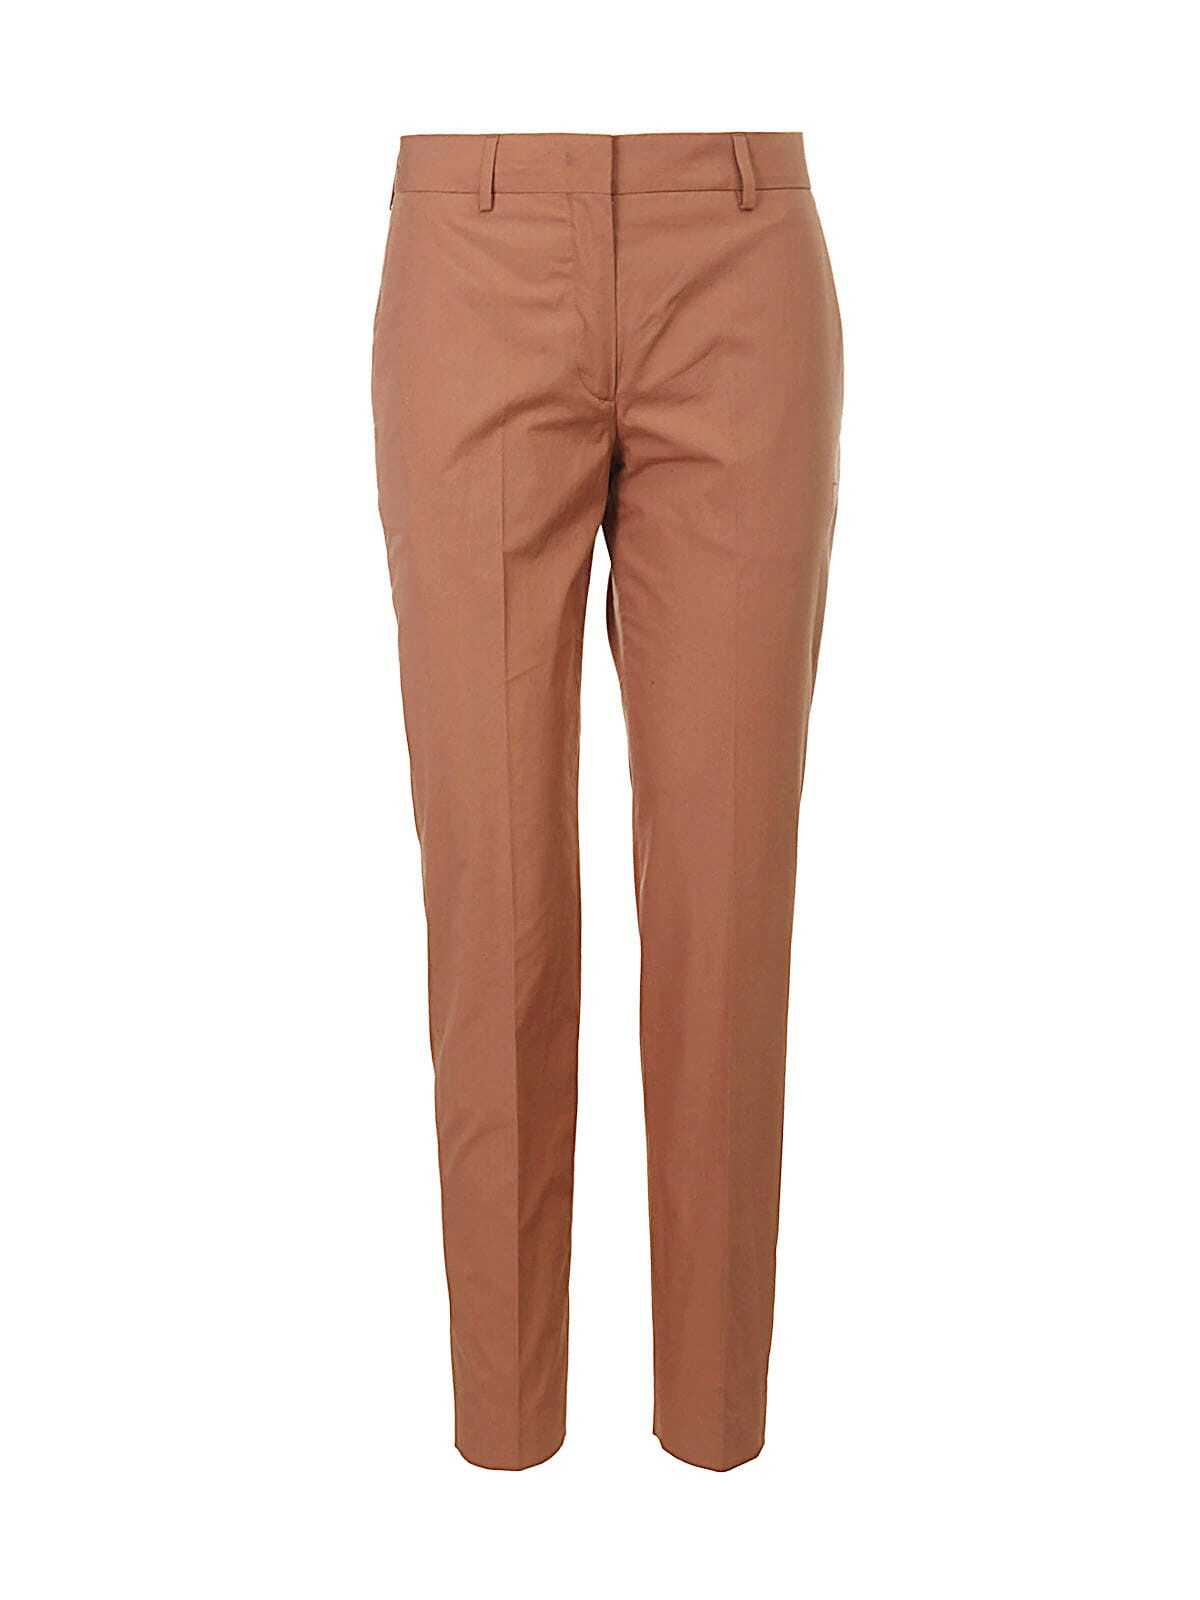 Paul Smith Cigarette Trousers in taupe